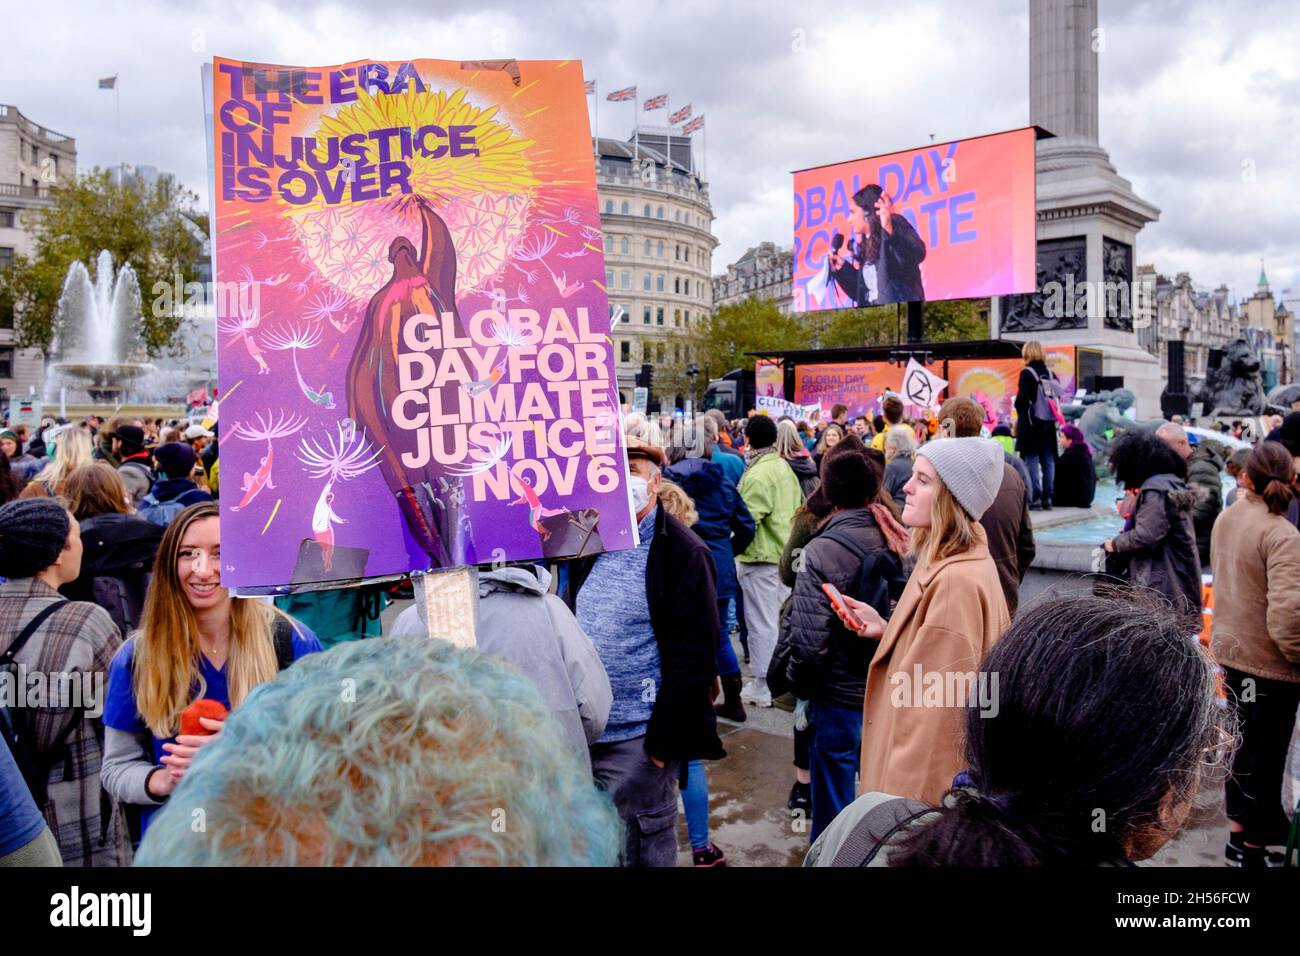 Environmental campaigners rally in Trafalgar Square on Global Day For Climate Justice, London, UK. Stock Photo